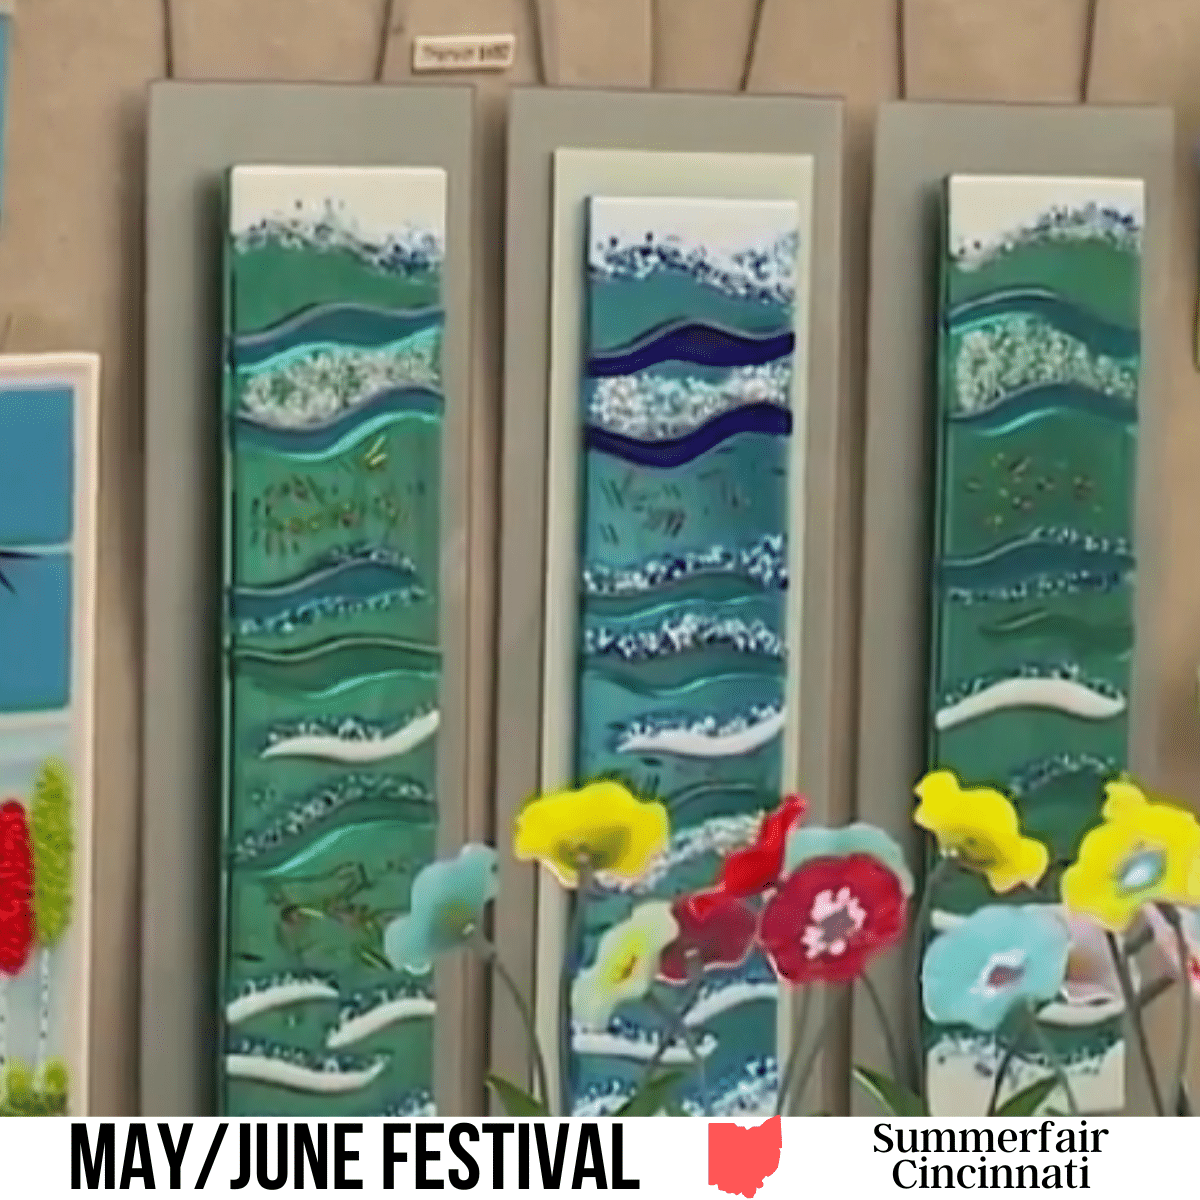 A square image of a photo of a drawing of 3 pieces of framed art on a wall with colorful flowers in front of it. A white strip across the bottom has text May/June Festival Summerfair Cincinnati.